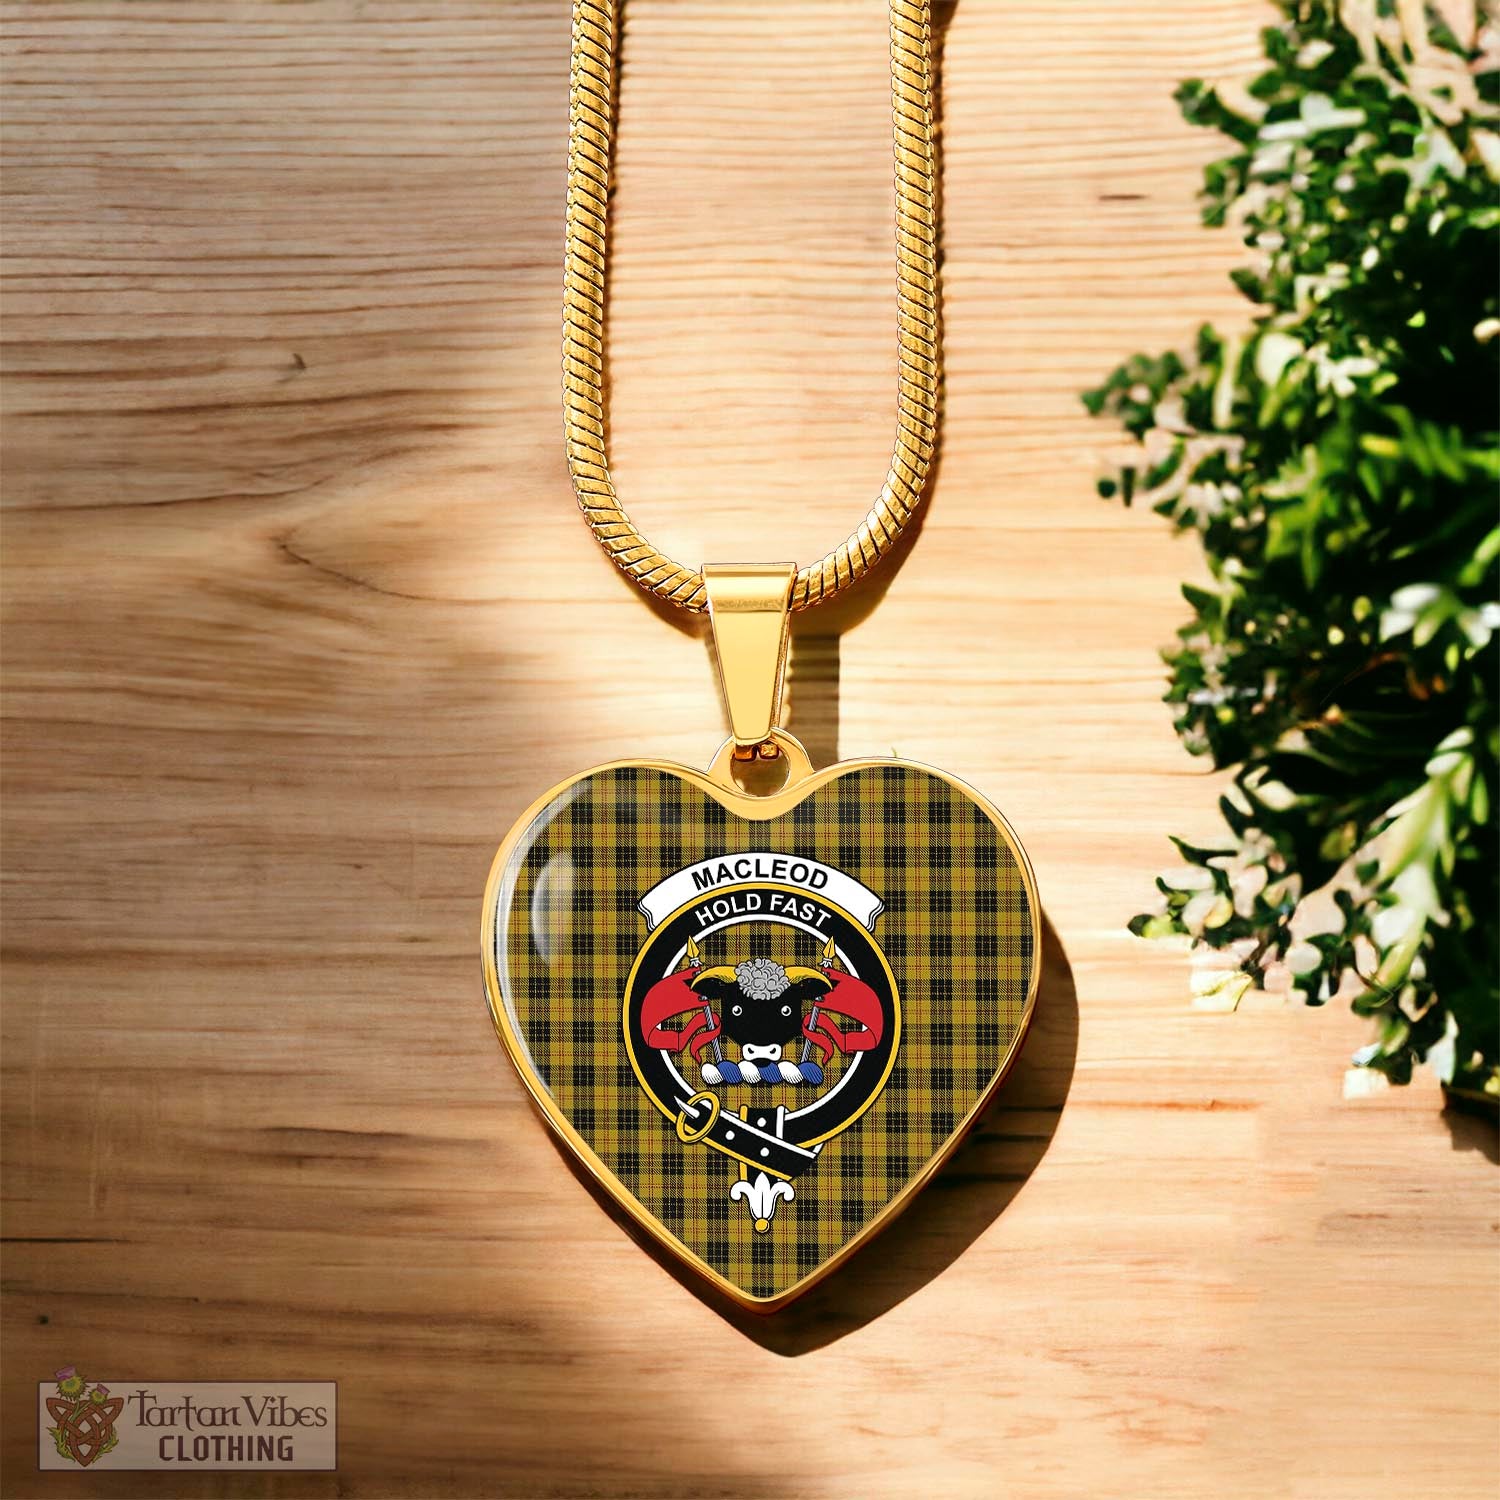 Tartan Vibes Clothing MacLeod Tartan Heart Necklace with Family Crest